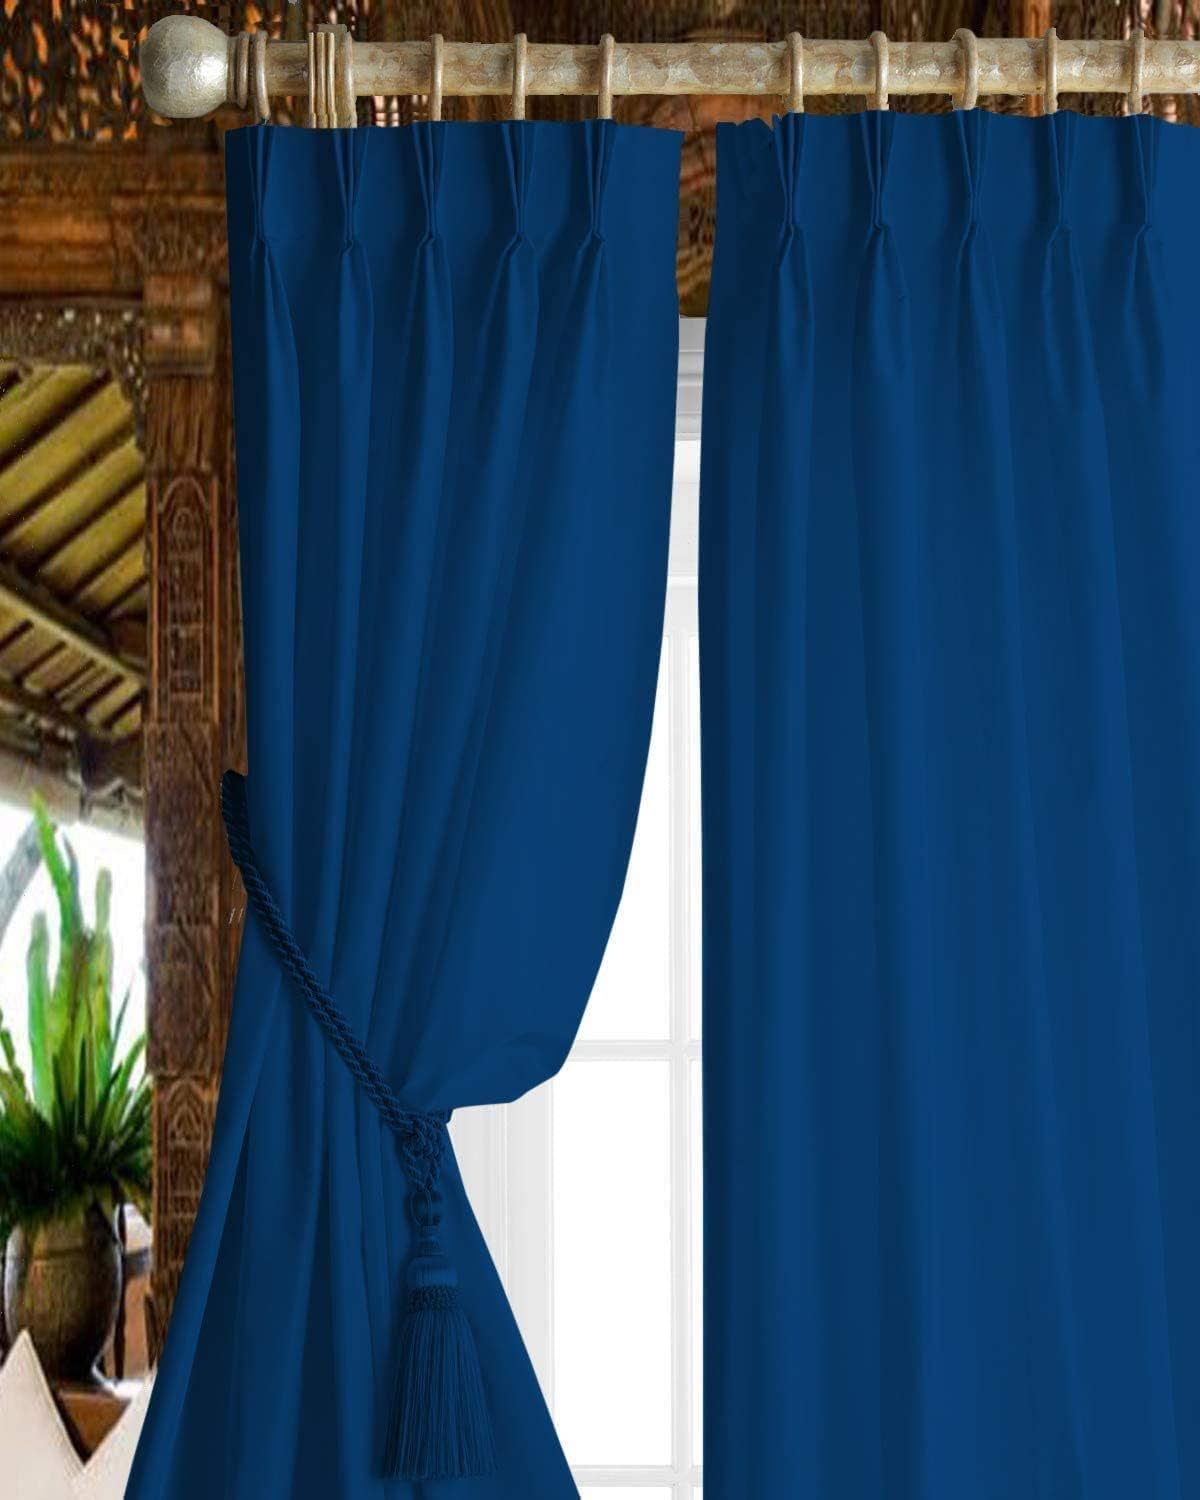 Magic Drapes Pinch Pleated Curtains Triple Pinch Pleat Drapes with Tiebacks & Hooks Blackout Thermal Room Darkening Window Curtains for Living Room, Bedroom, Hall W(26"+26") L45 (2 Panels, Royal Blue)  Magic Drapes Solid - Royal Blue 70"X 54" 